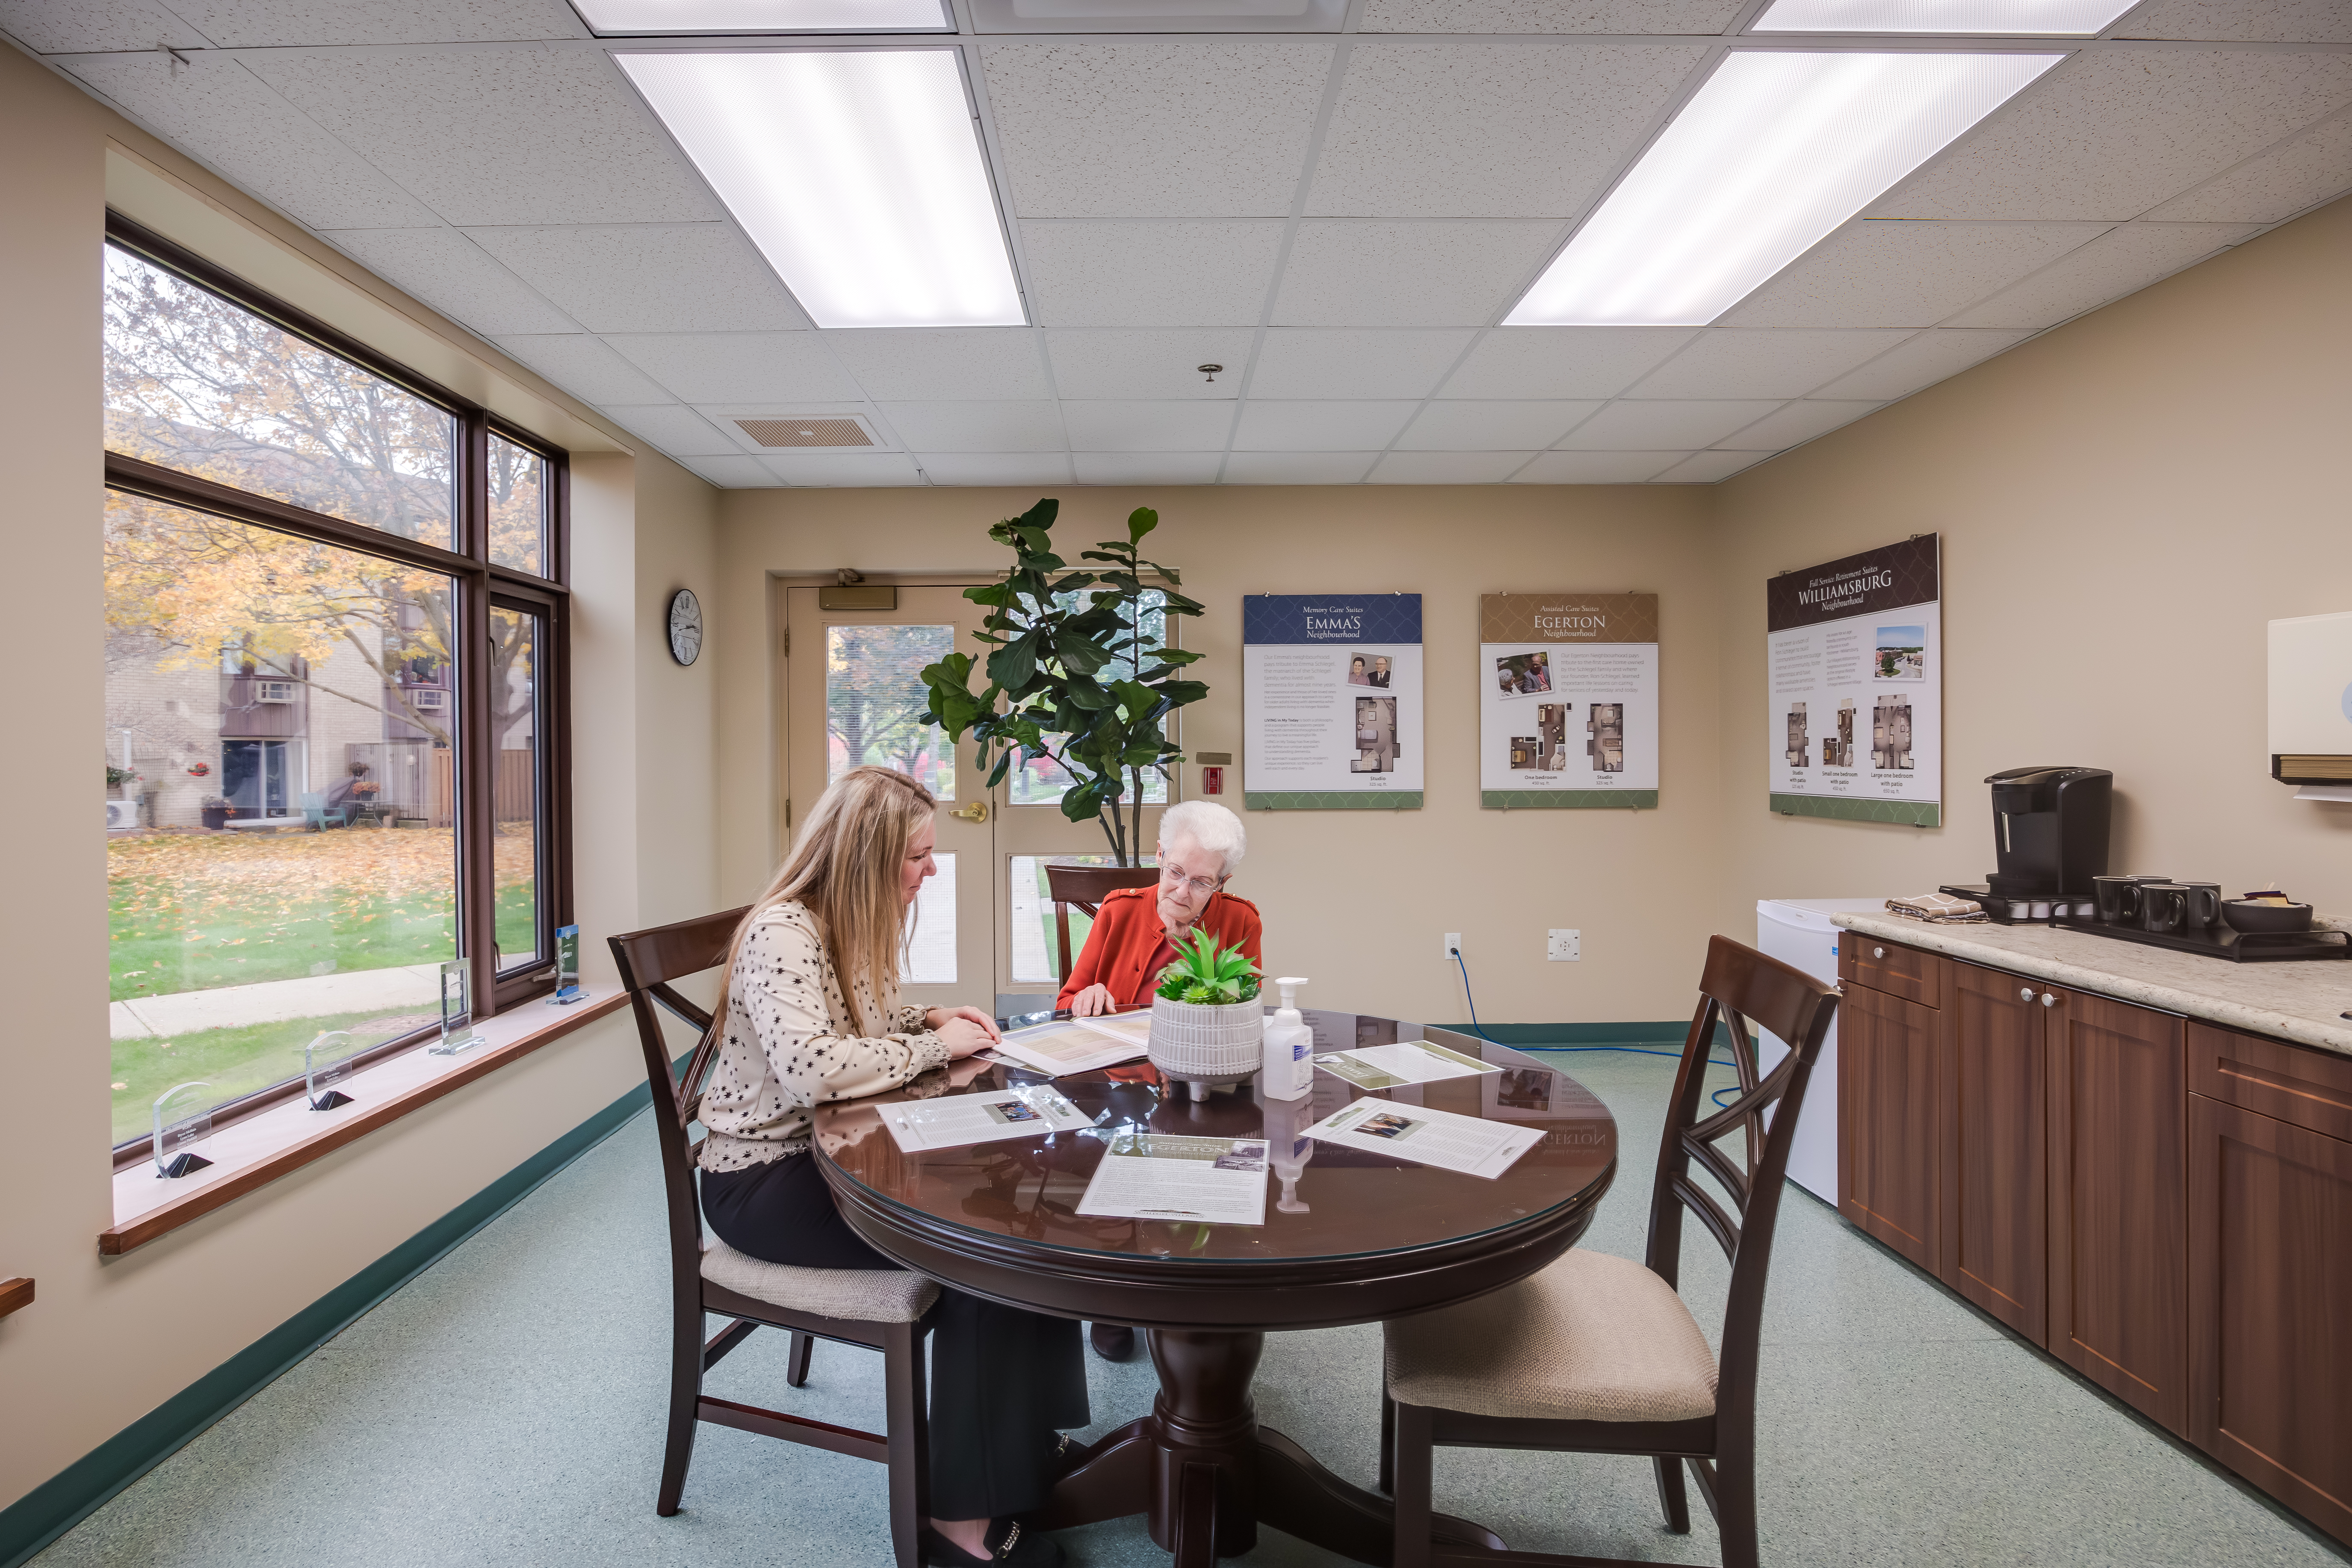 Director of Lifestyle Options meets with future resident in the Welcome Centre at The Village of Riverside Glen